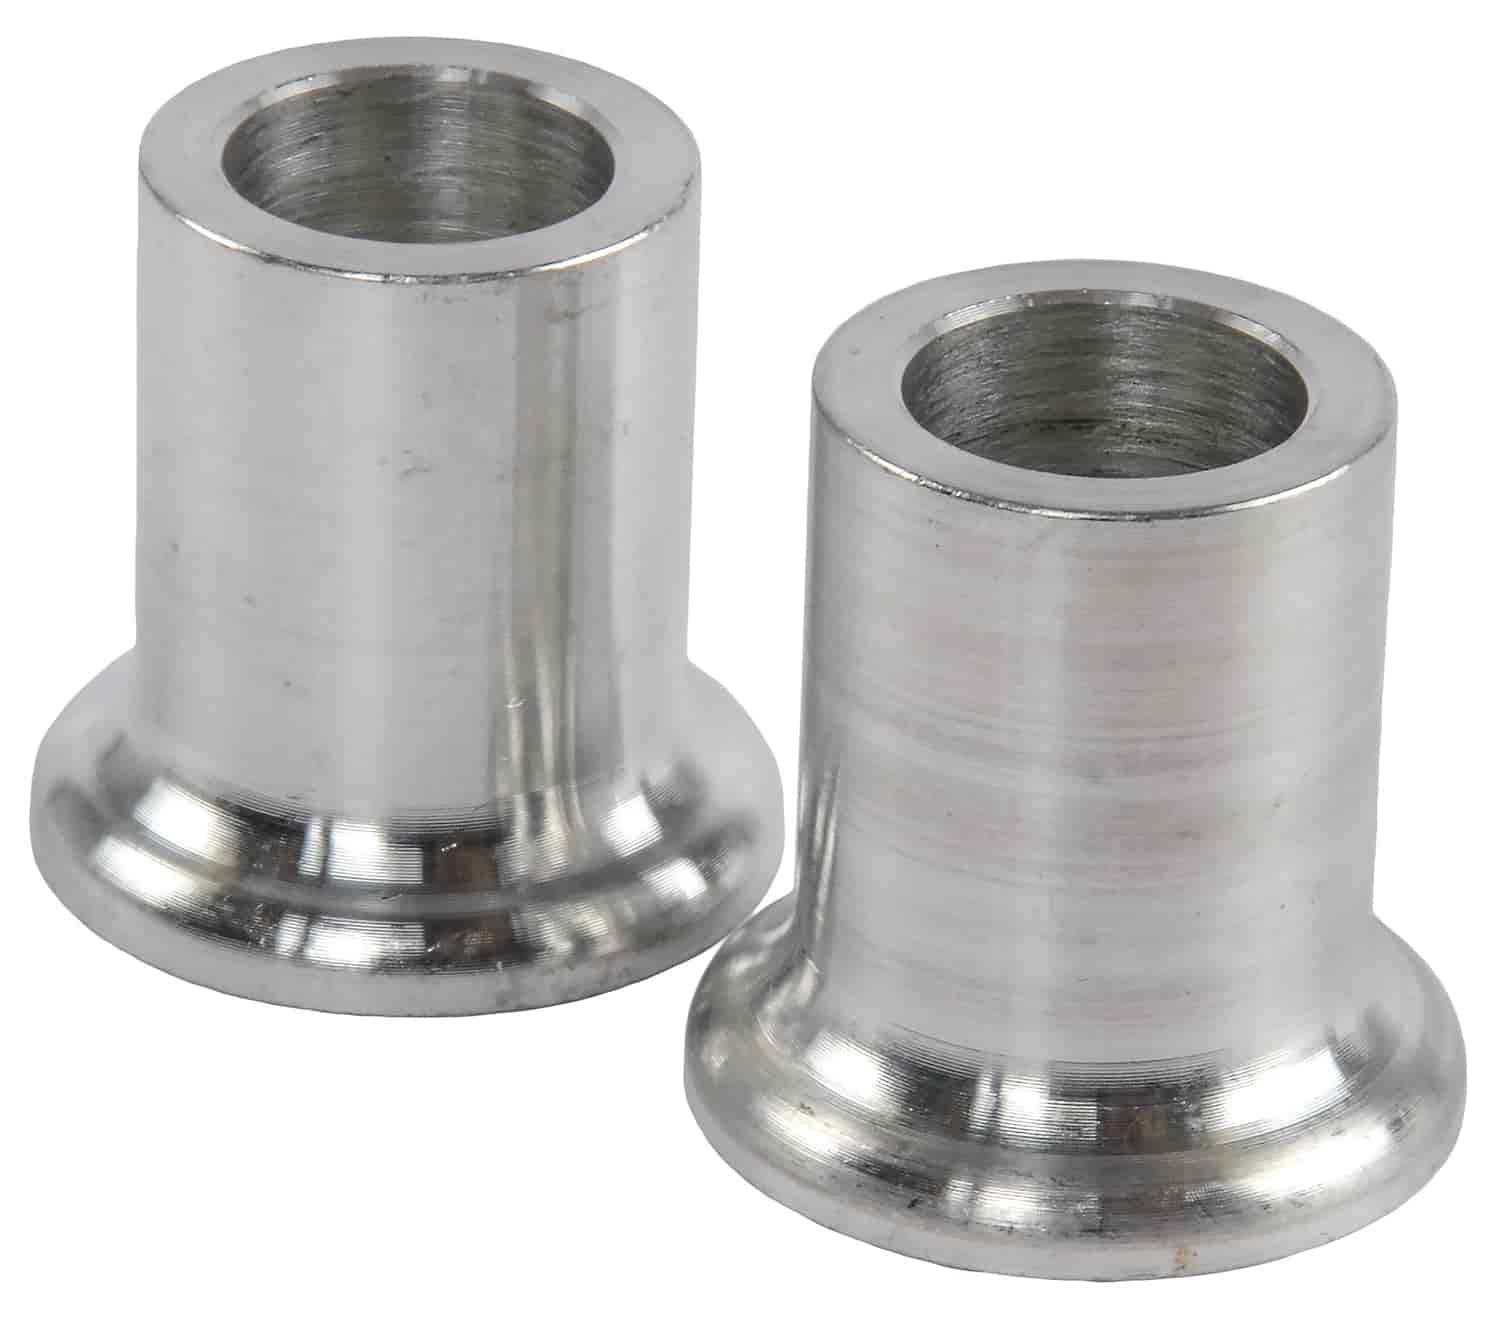 Aluminum Tapered Rod End Spacers 1/2 in. ID (Bolt Size) x 1 in. L